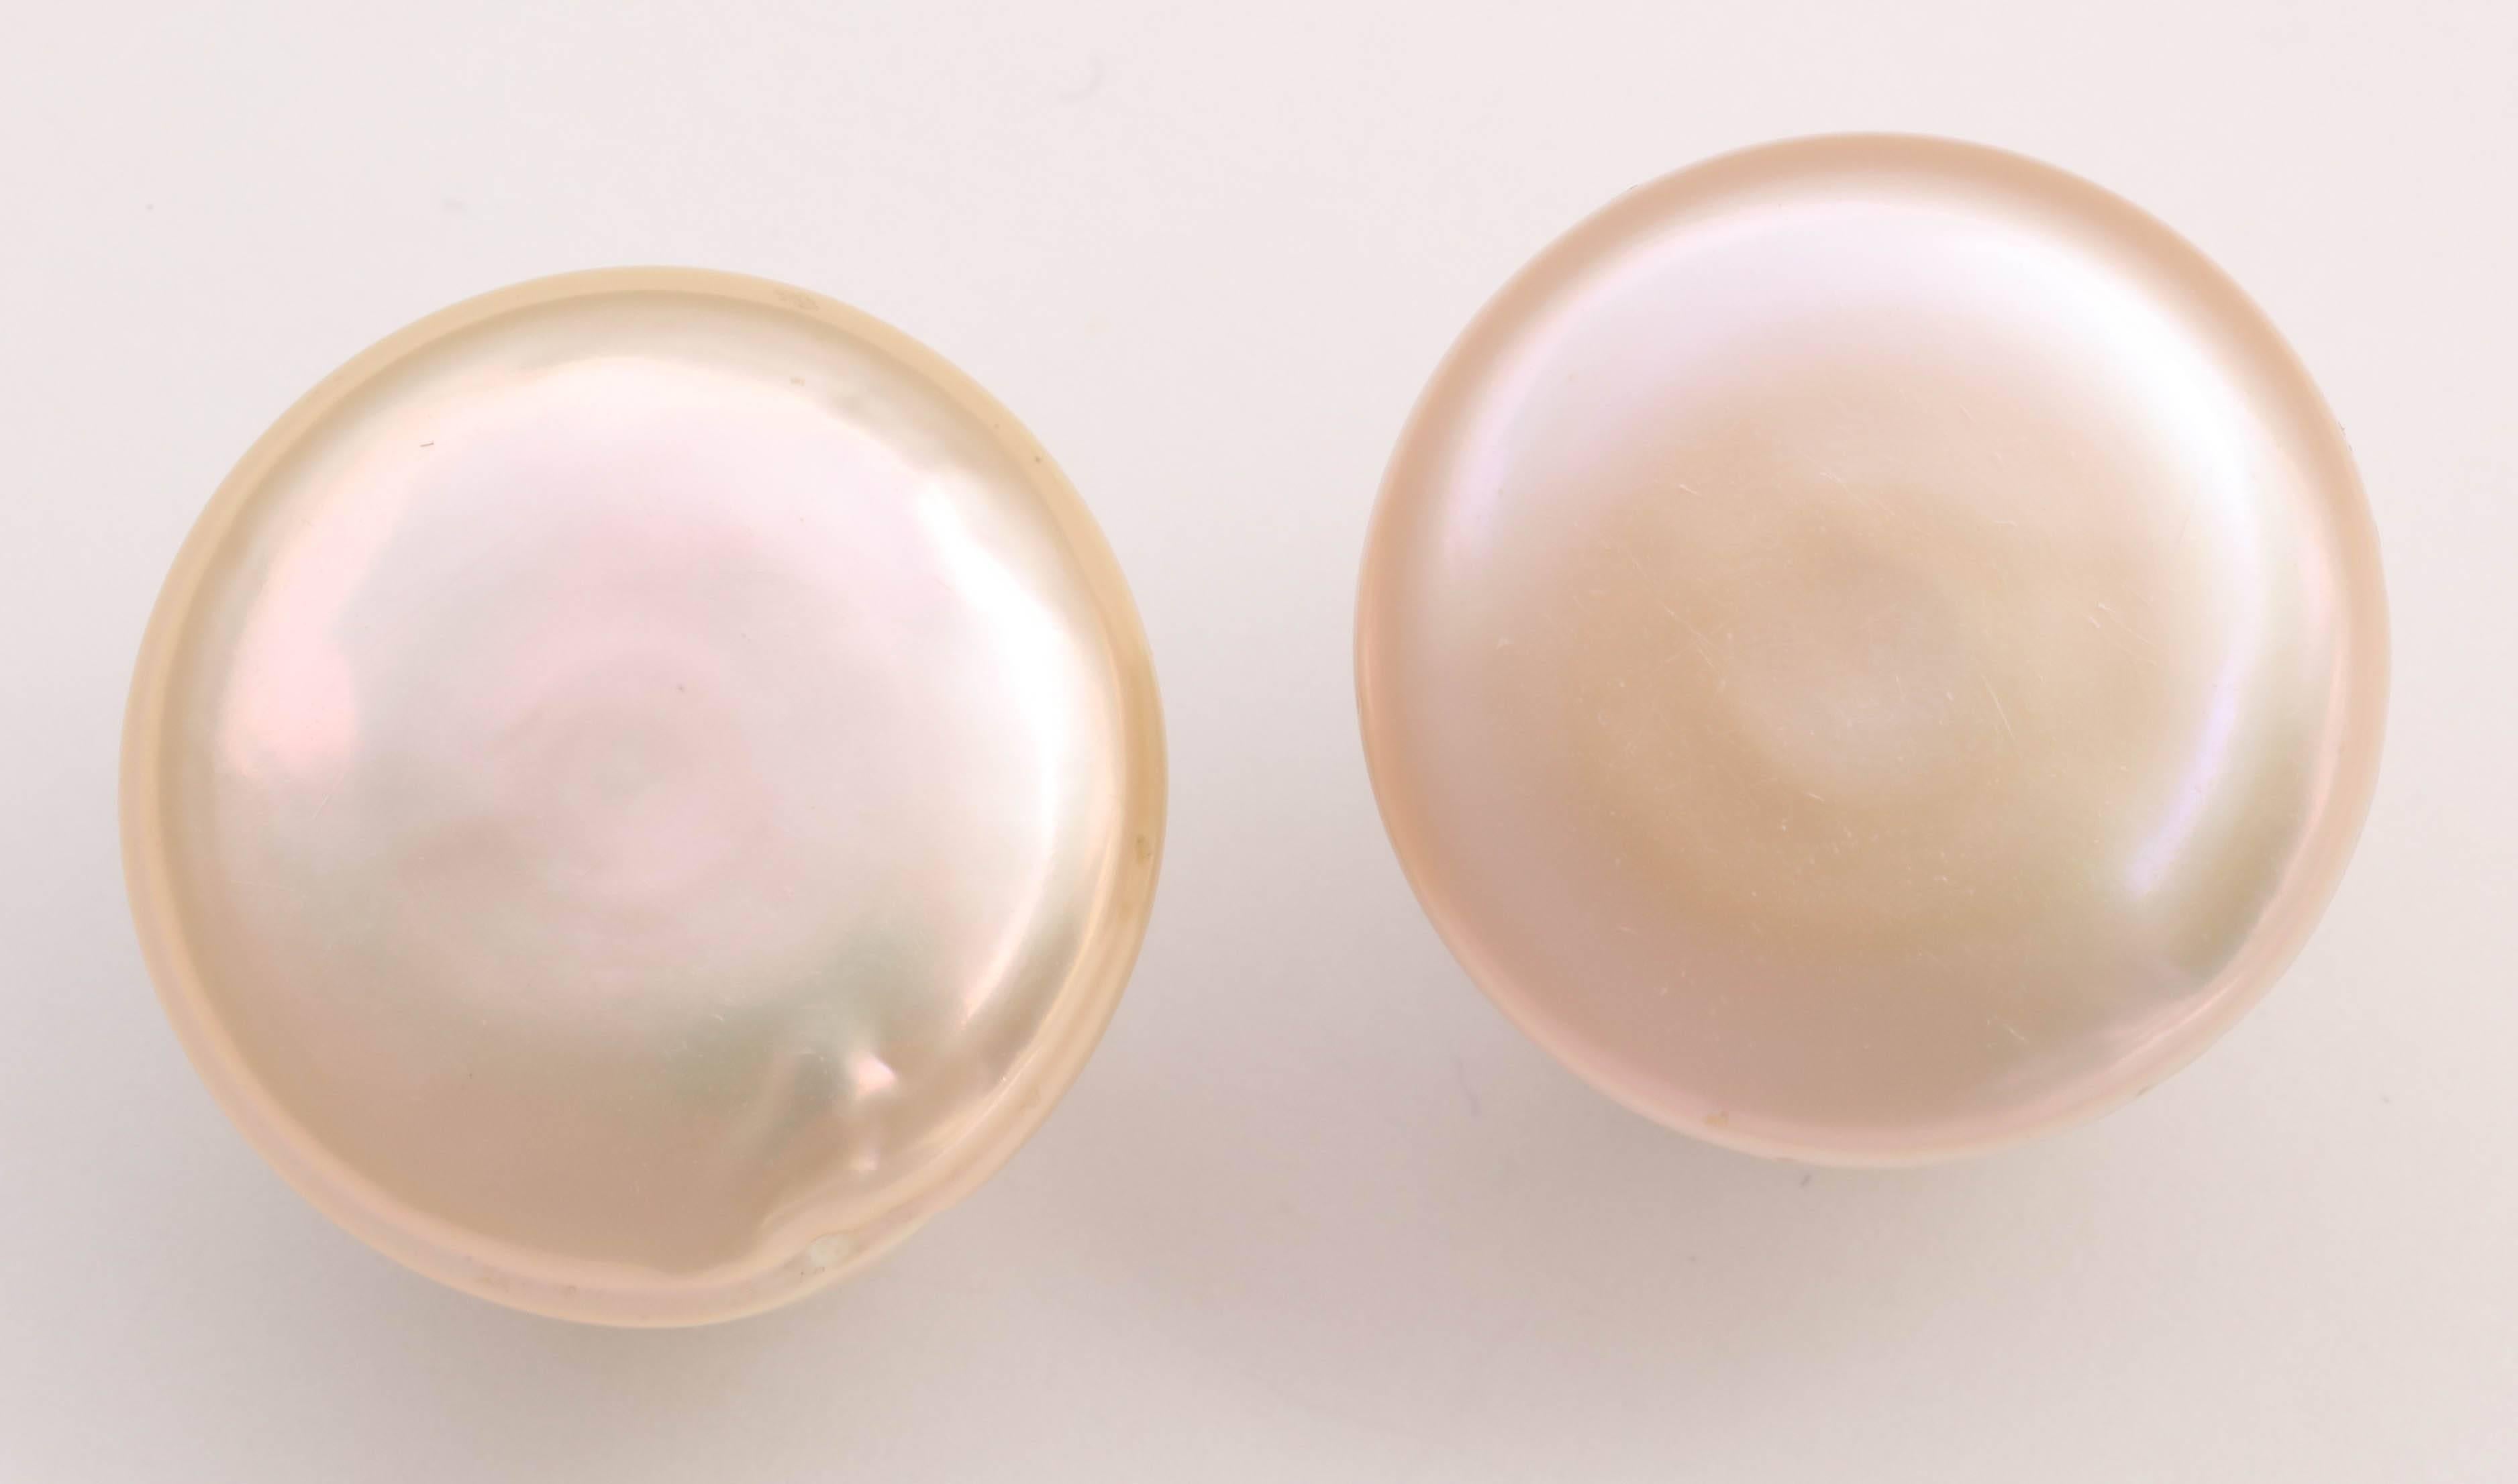 Gorgeous peachy-beige large button earrings with omega clip backs. Great for office wear, easily transferring to evening elegance. Can also be made with posts.